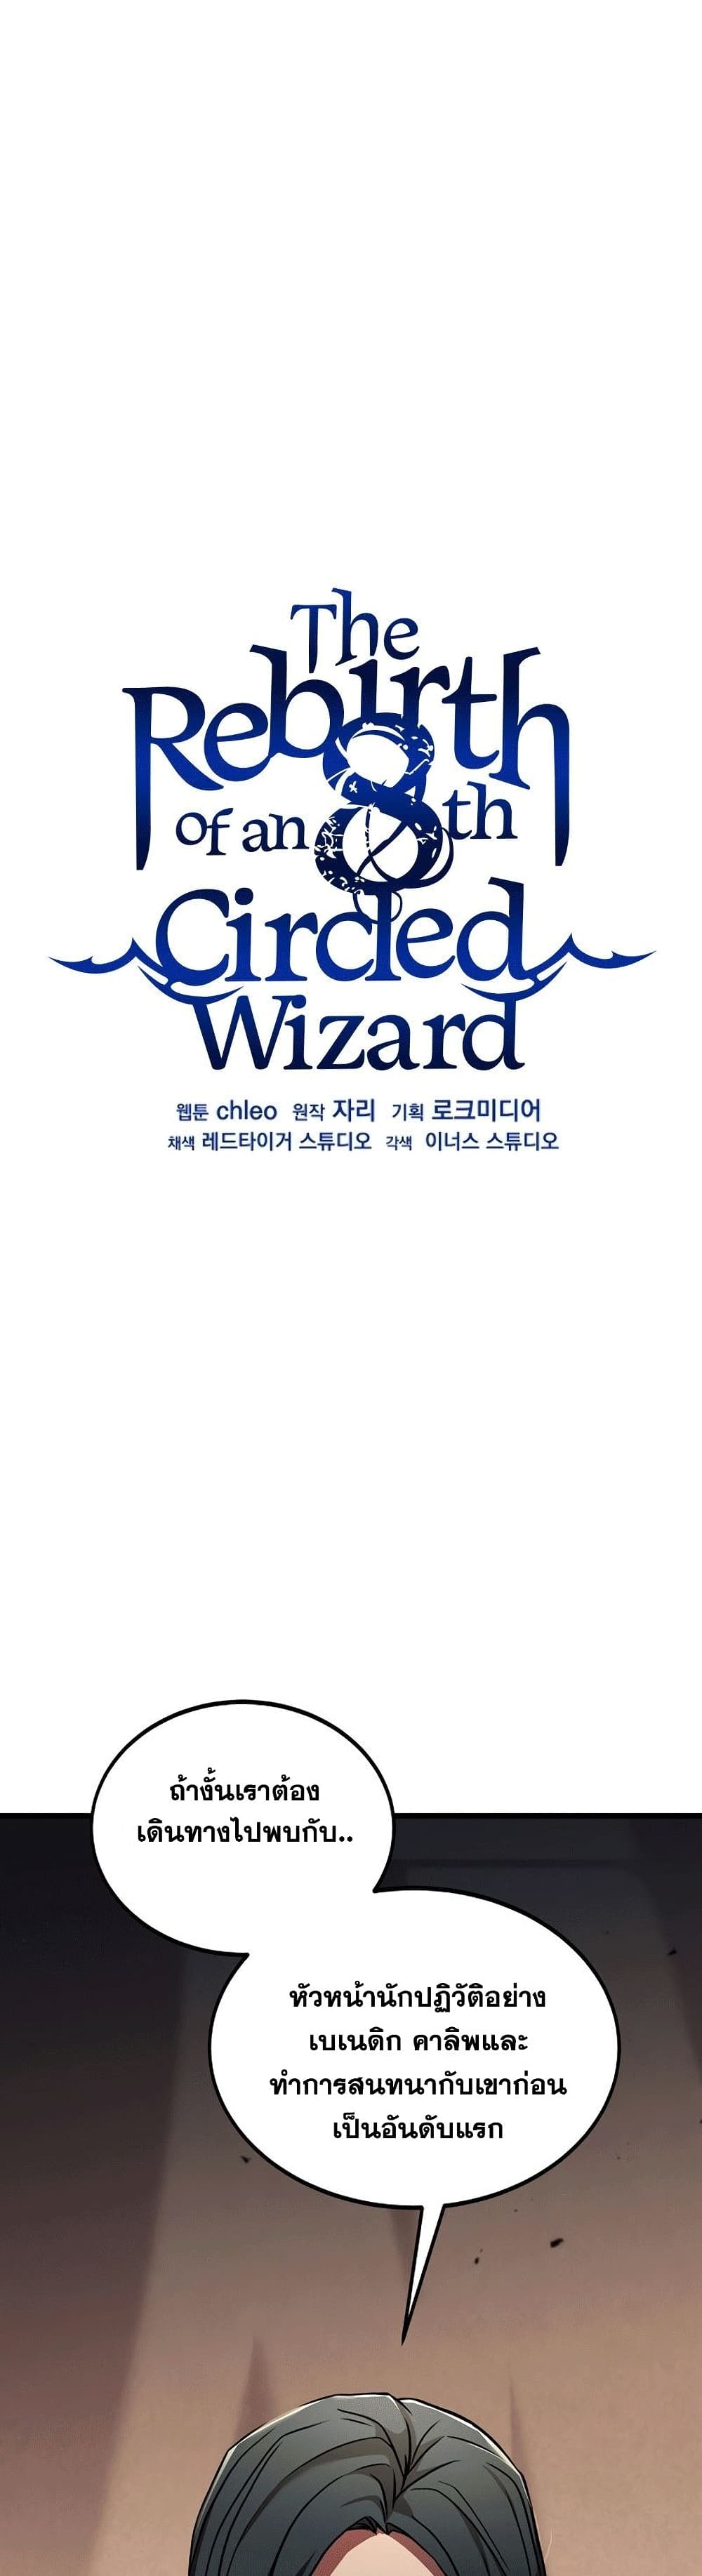 The Rebirth of an 8th Circled Wizard 92-92